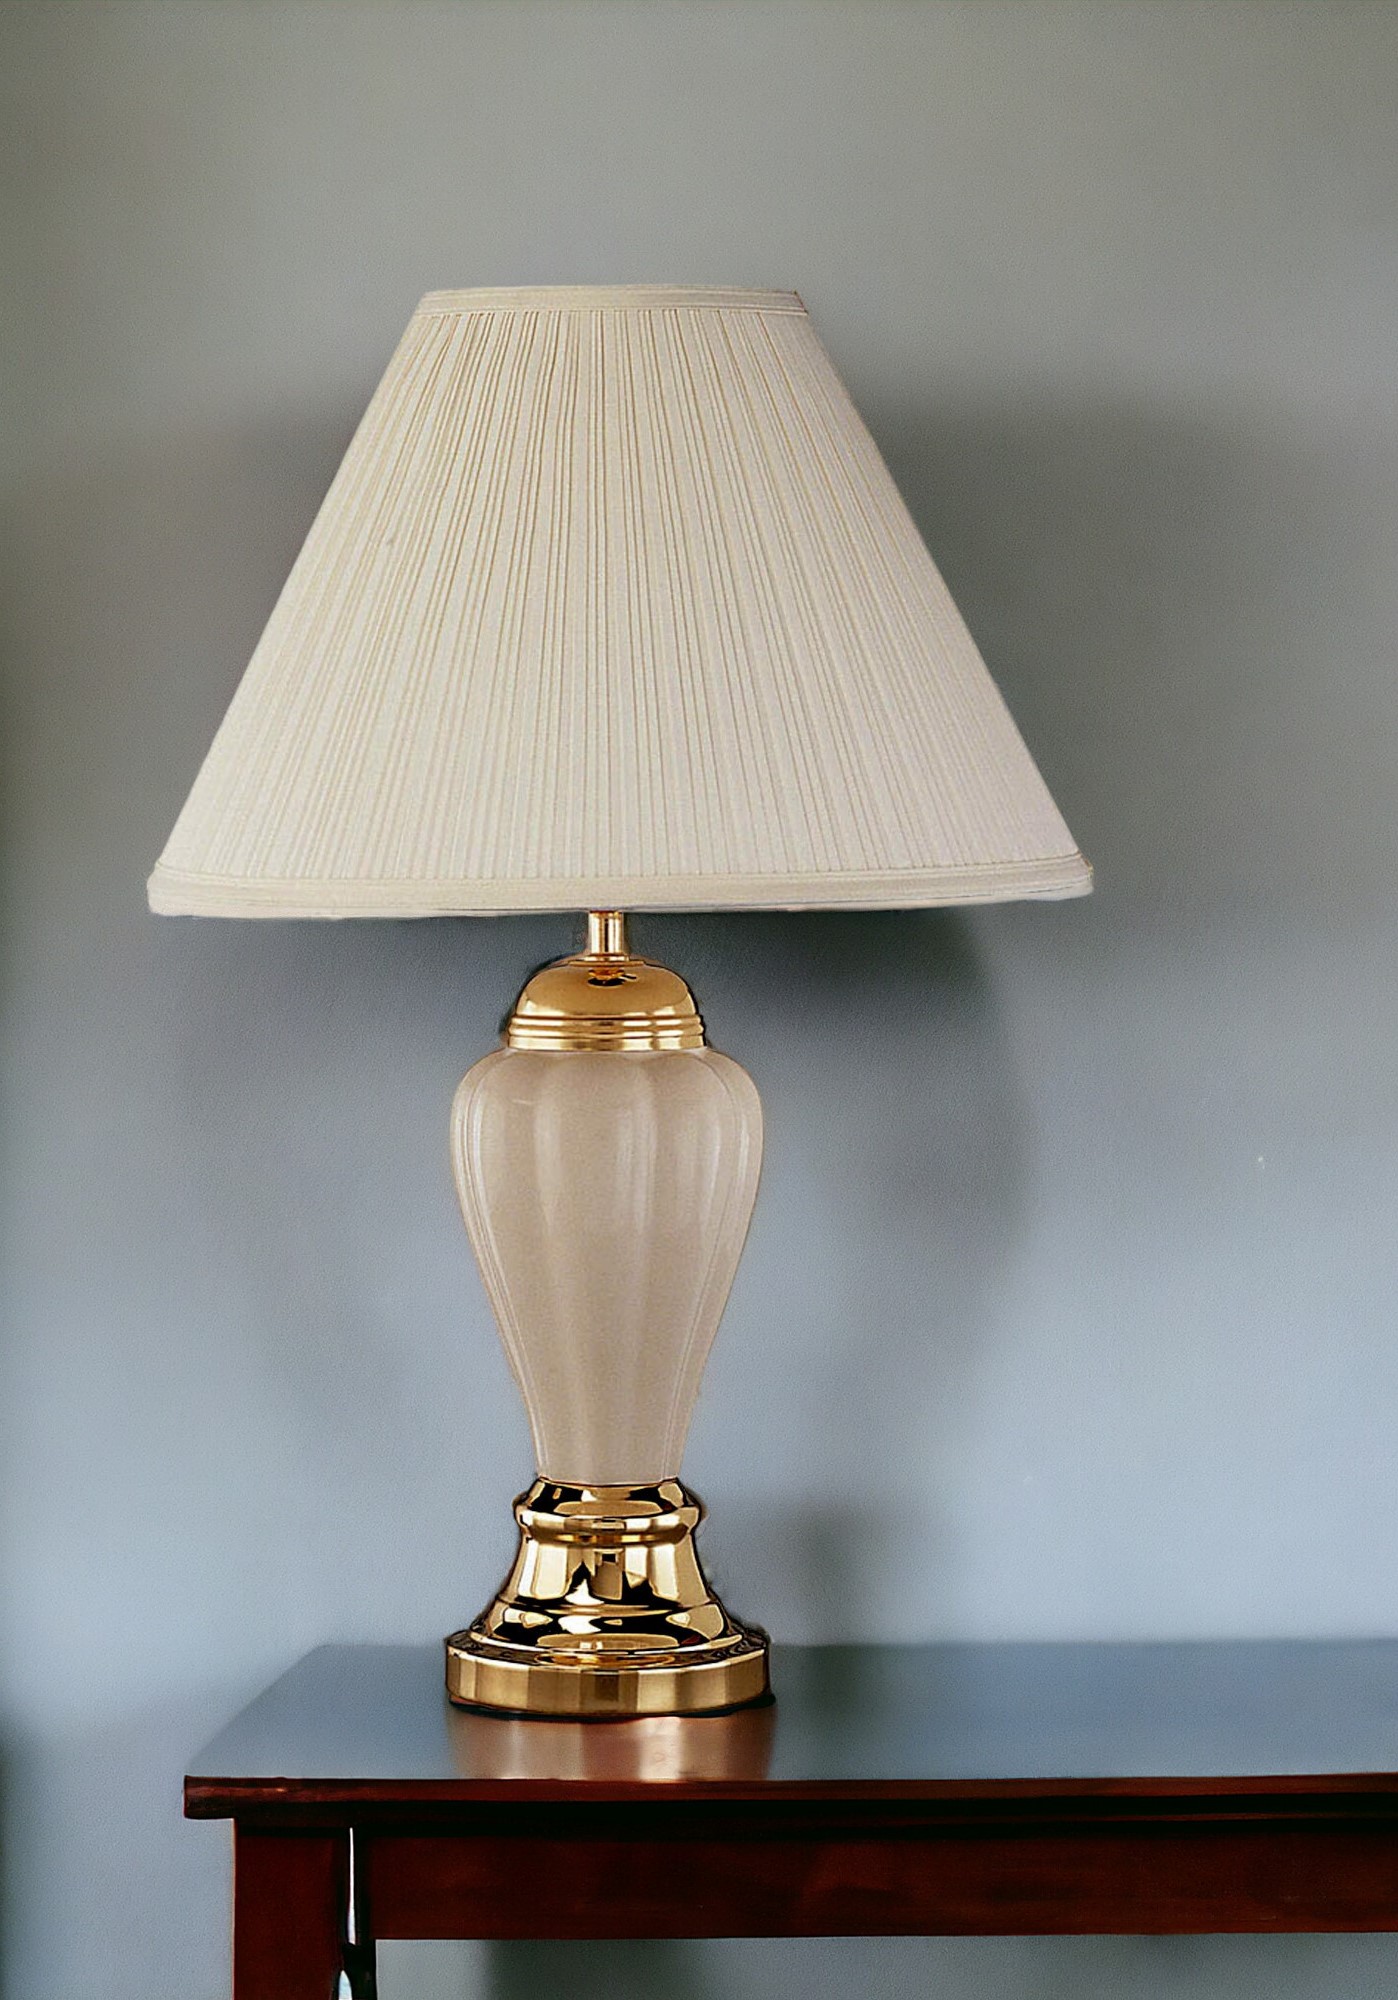 27" Ivory and Gold Ceramic Urn Table Lamp With Off White Empire Shade-468527-1